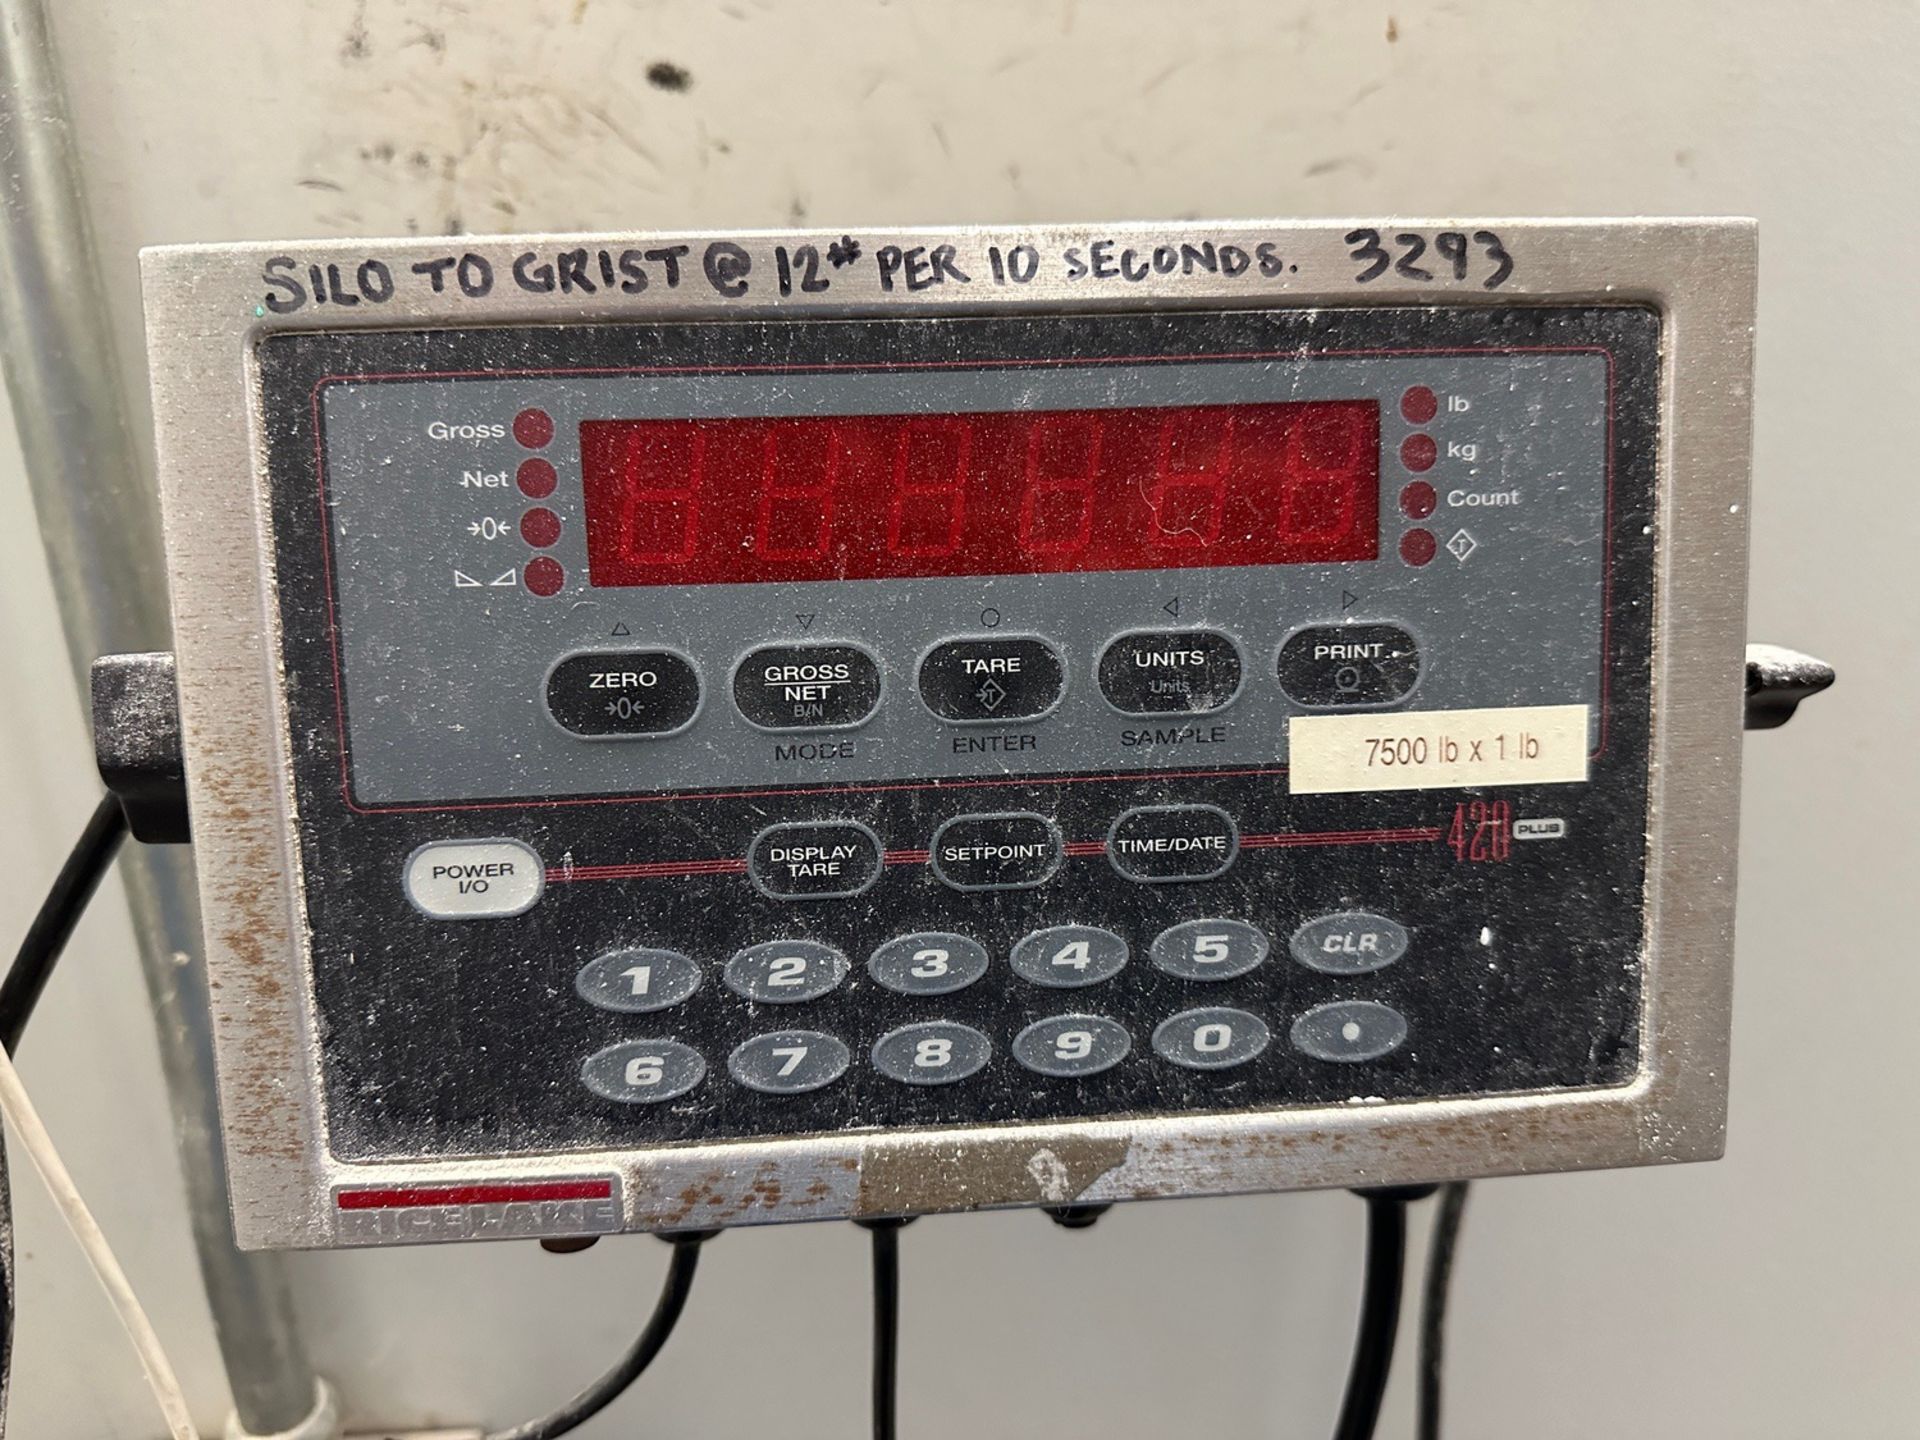 2016 NSI 1500 L Stainless Steel Grist Case on Rice Lake Load Cells (Approx. 6' Diam | Rig Fee $2140 - Image 4 of 6